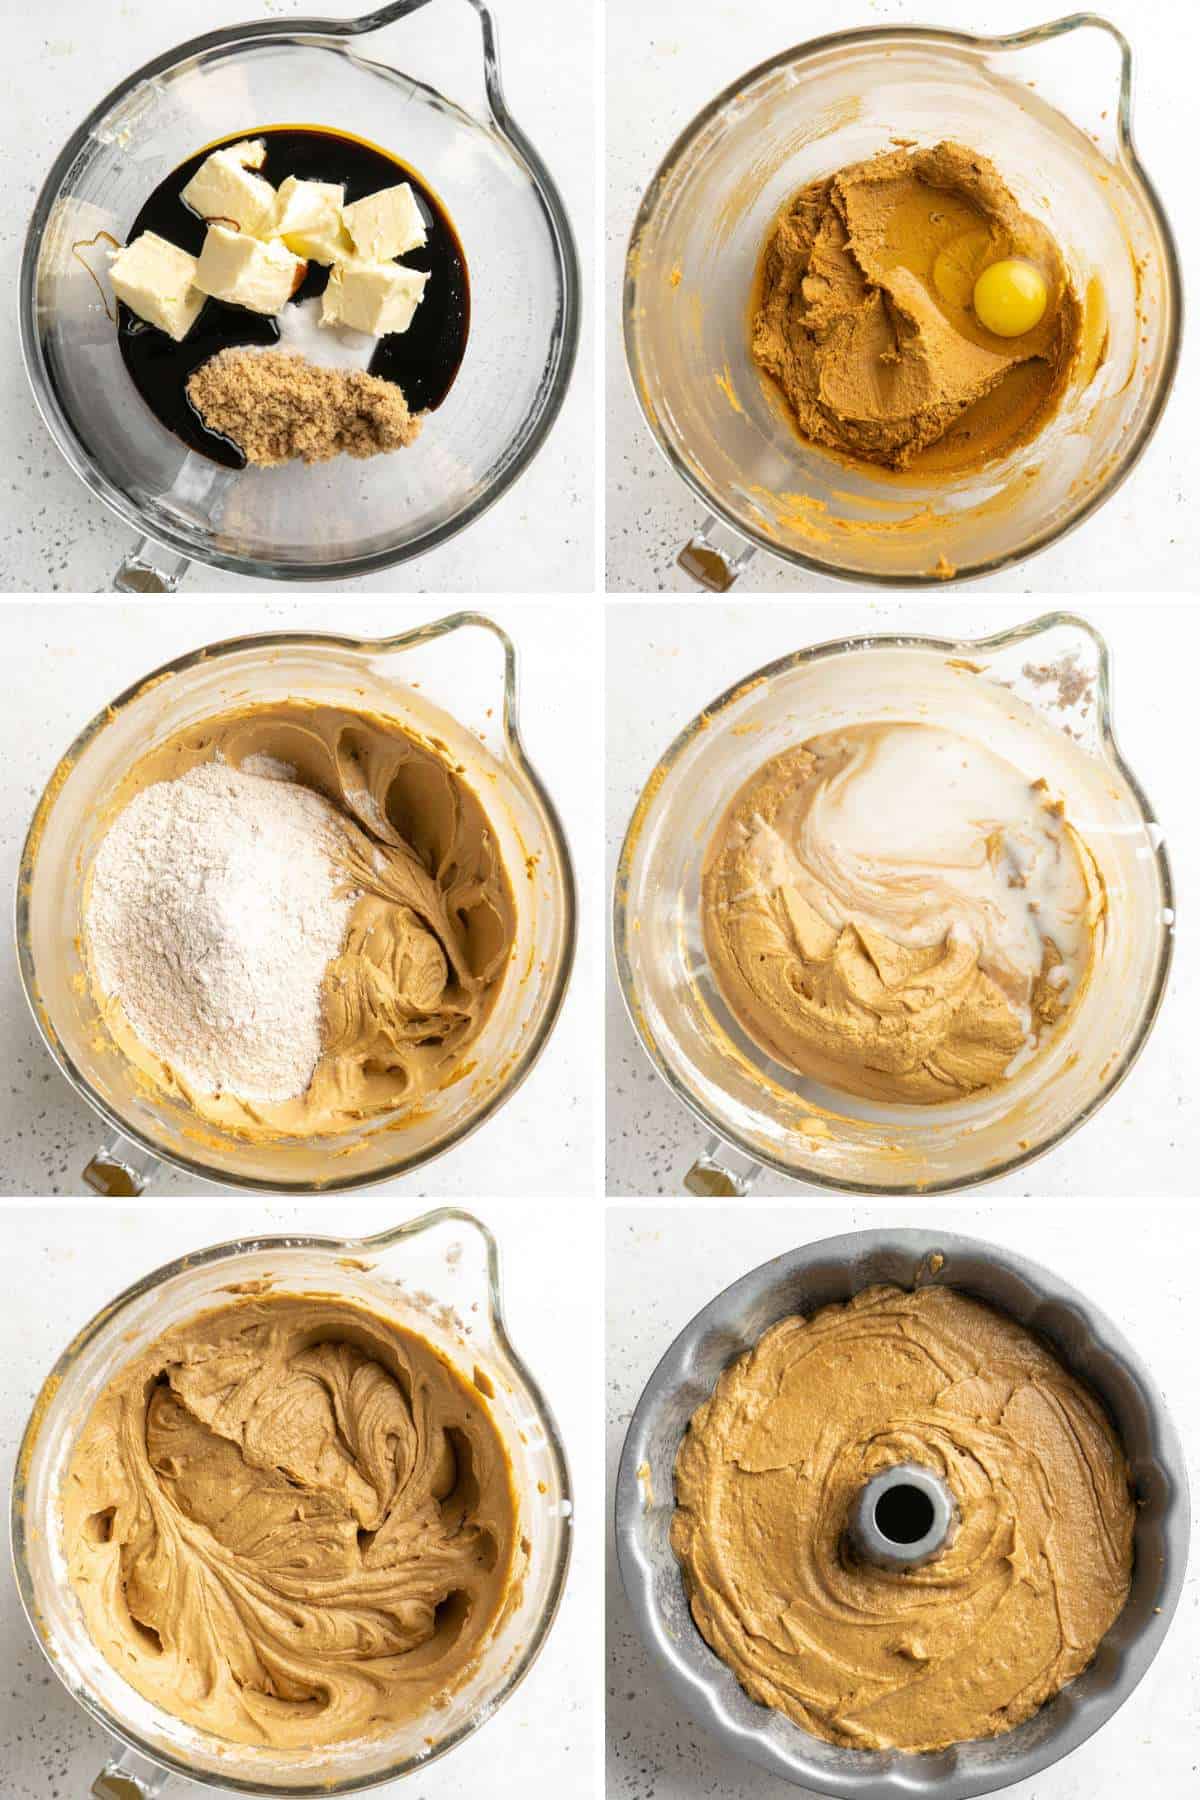 A collage showing the different steps involved in making gingerbread cake.